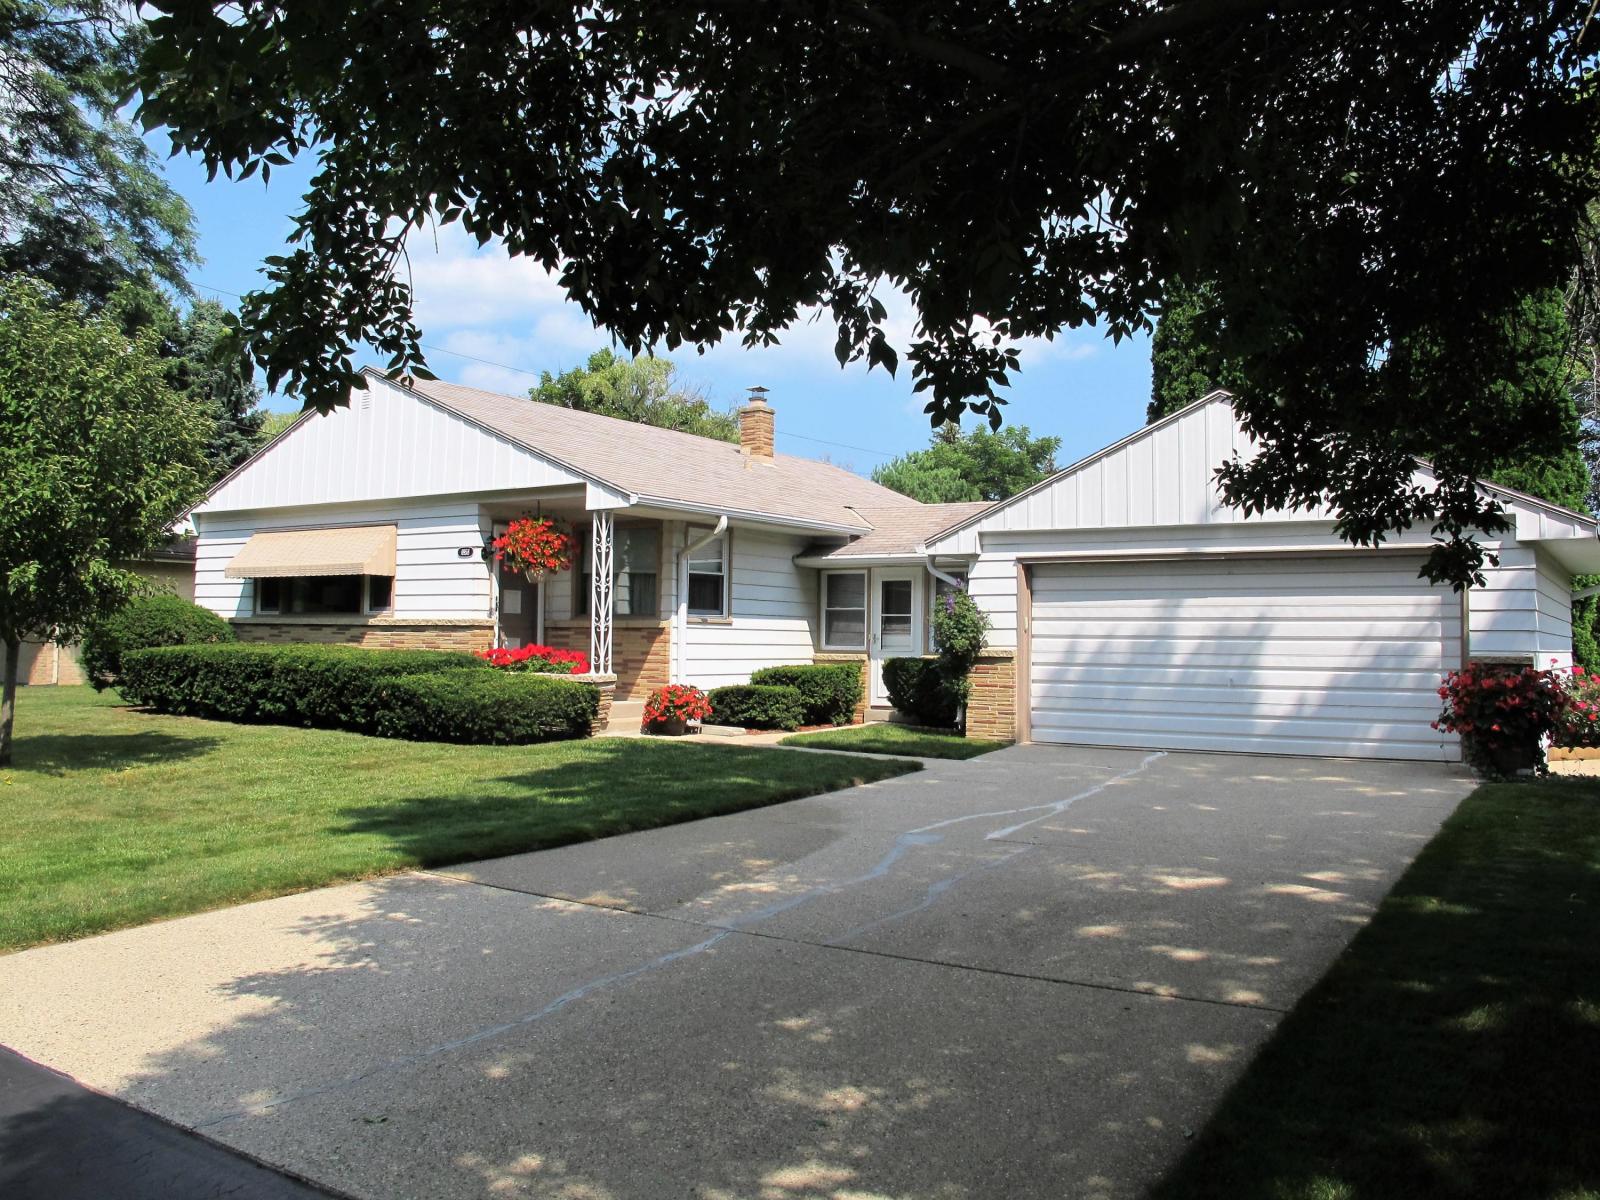 Home for Sale in Glendale WI